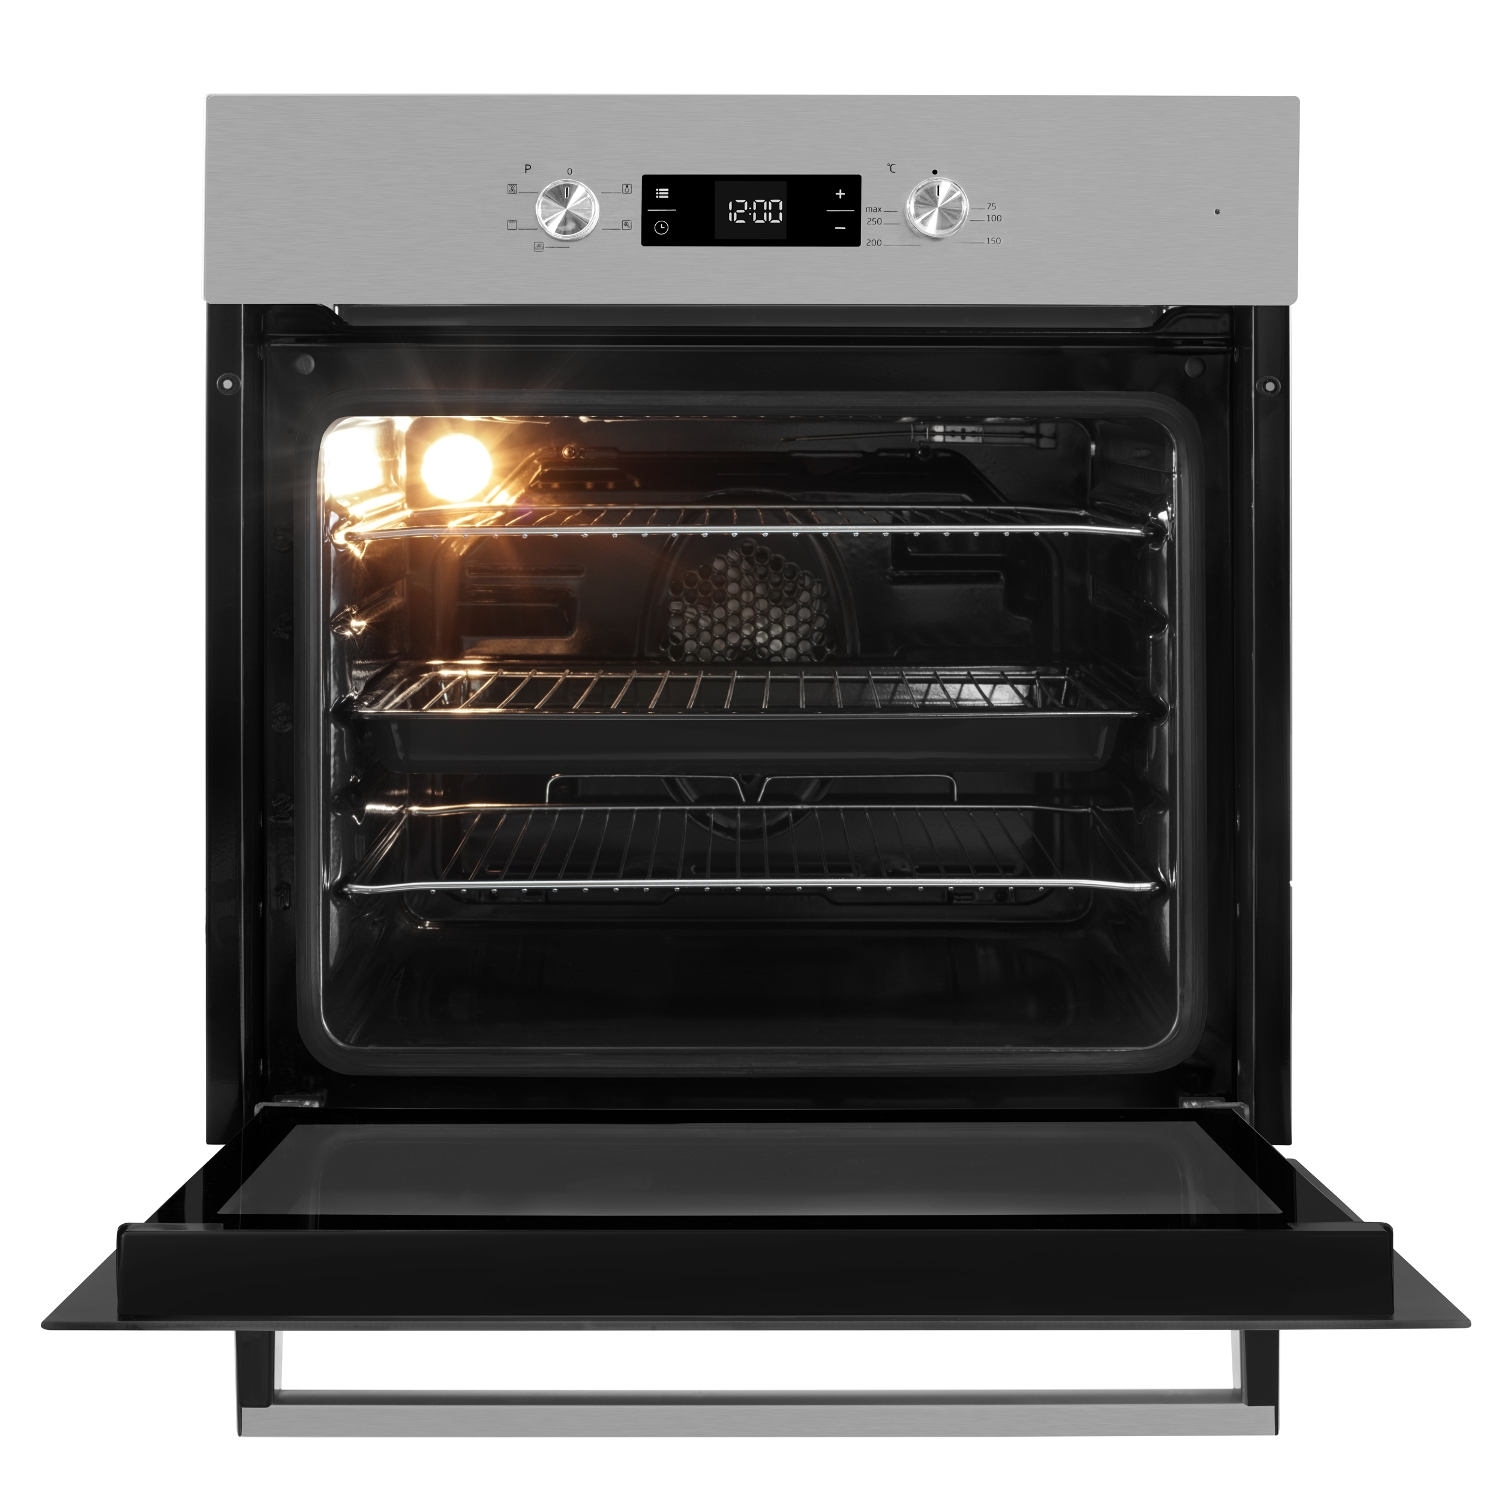 Beko Built In Electric Programmable Single Oven - Stainless Steel - A Rated - 3